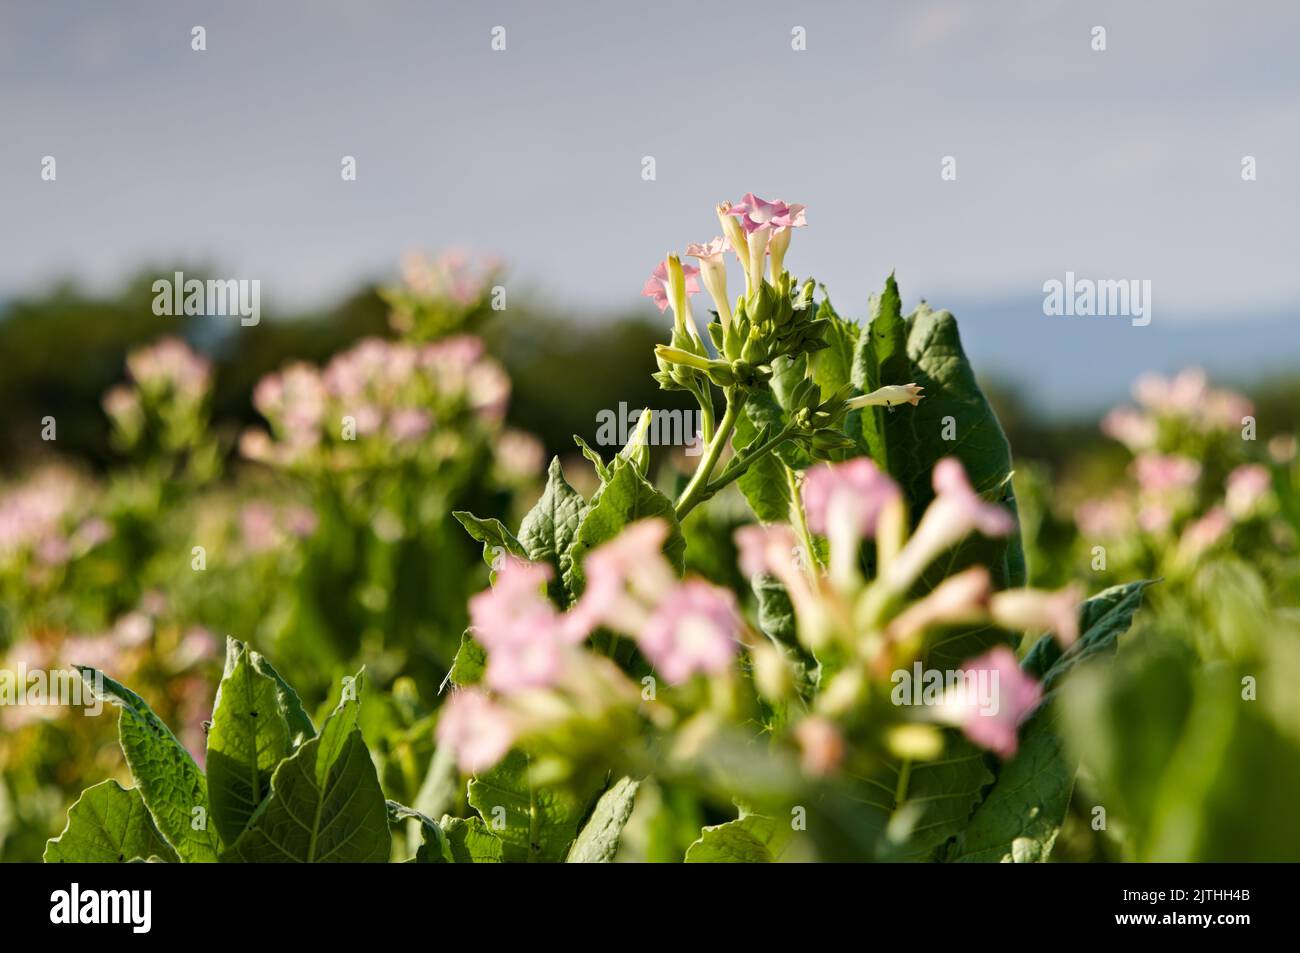 Flowering plants of tabaco Stock Photo